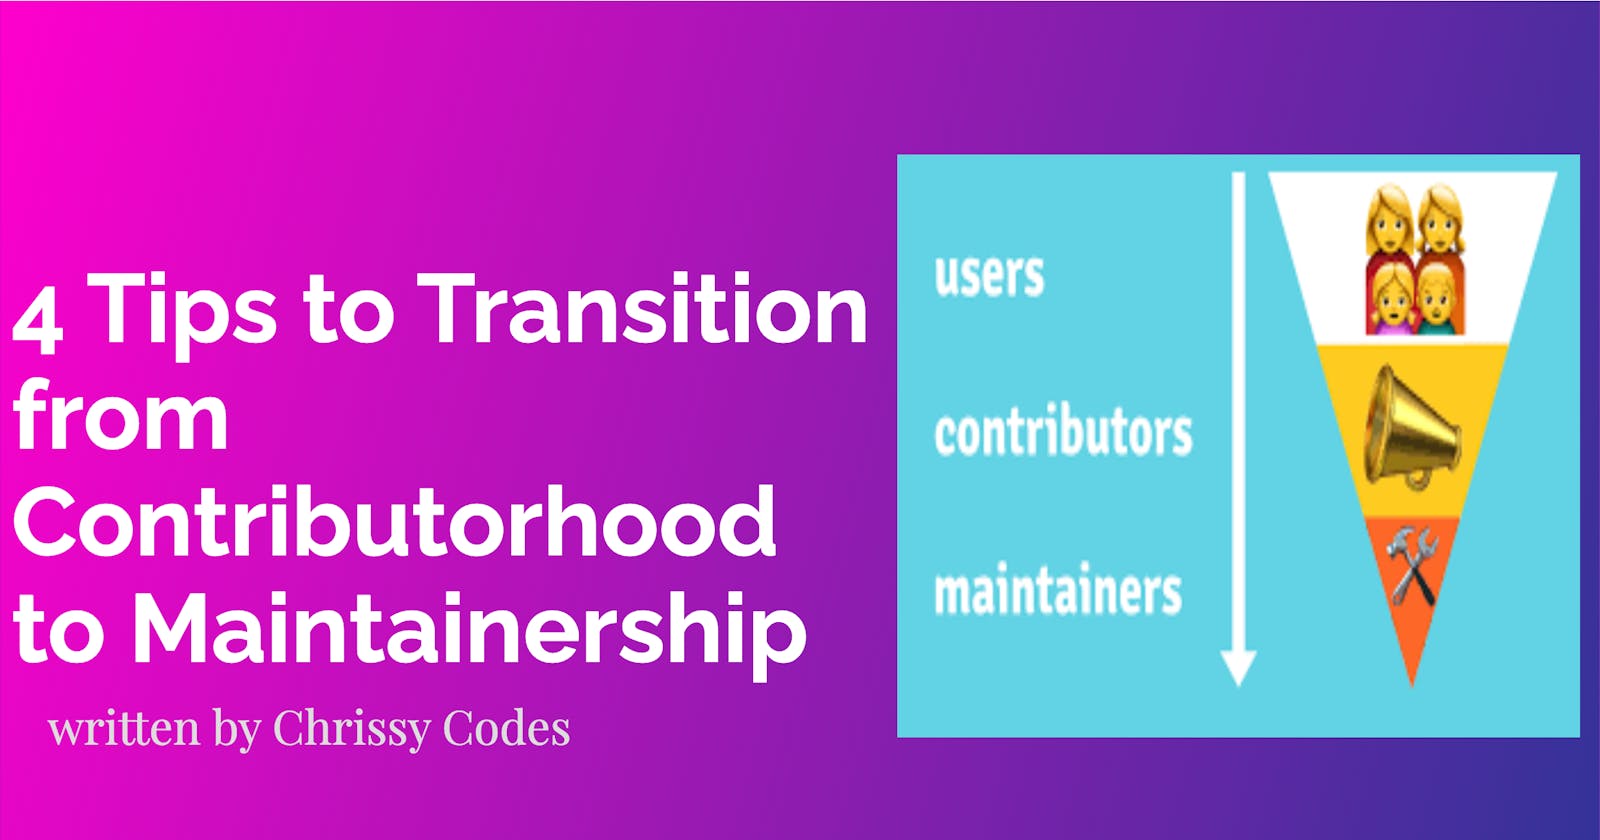 4 Tips to Transition from Contributorhood to Maintainership